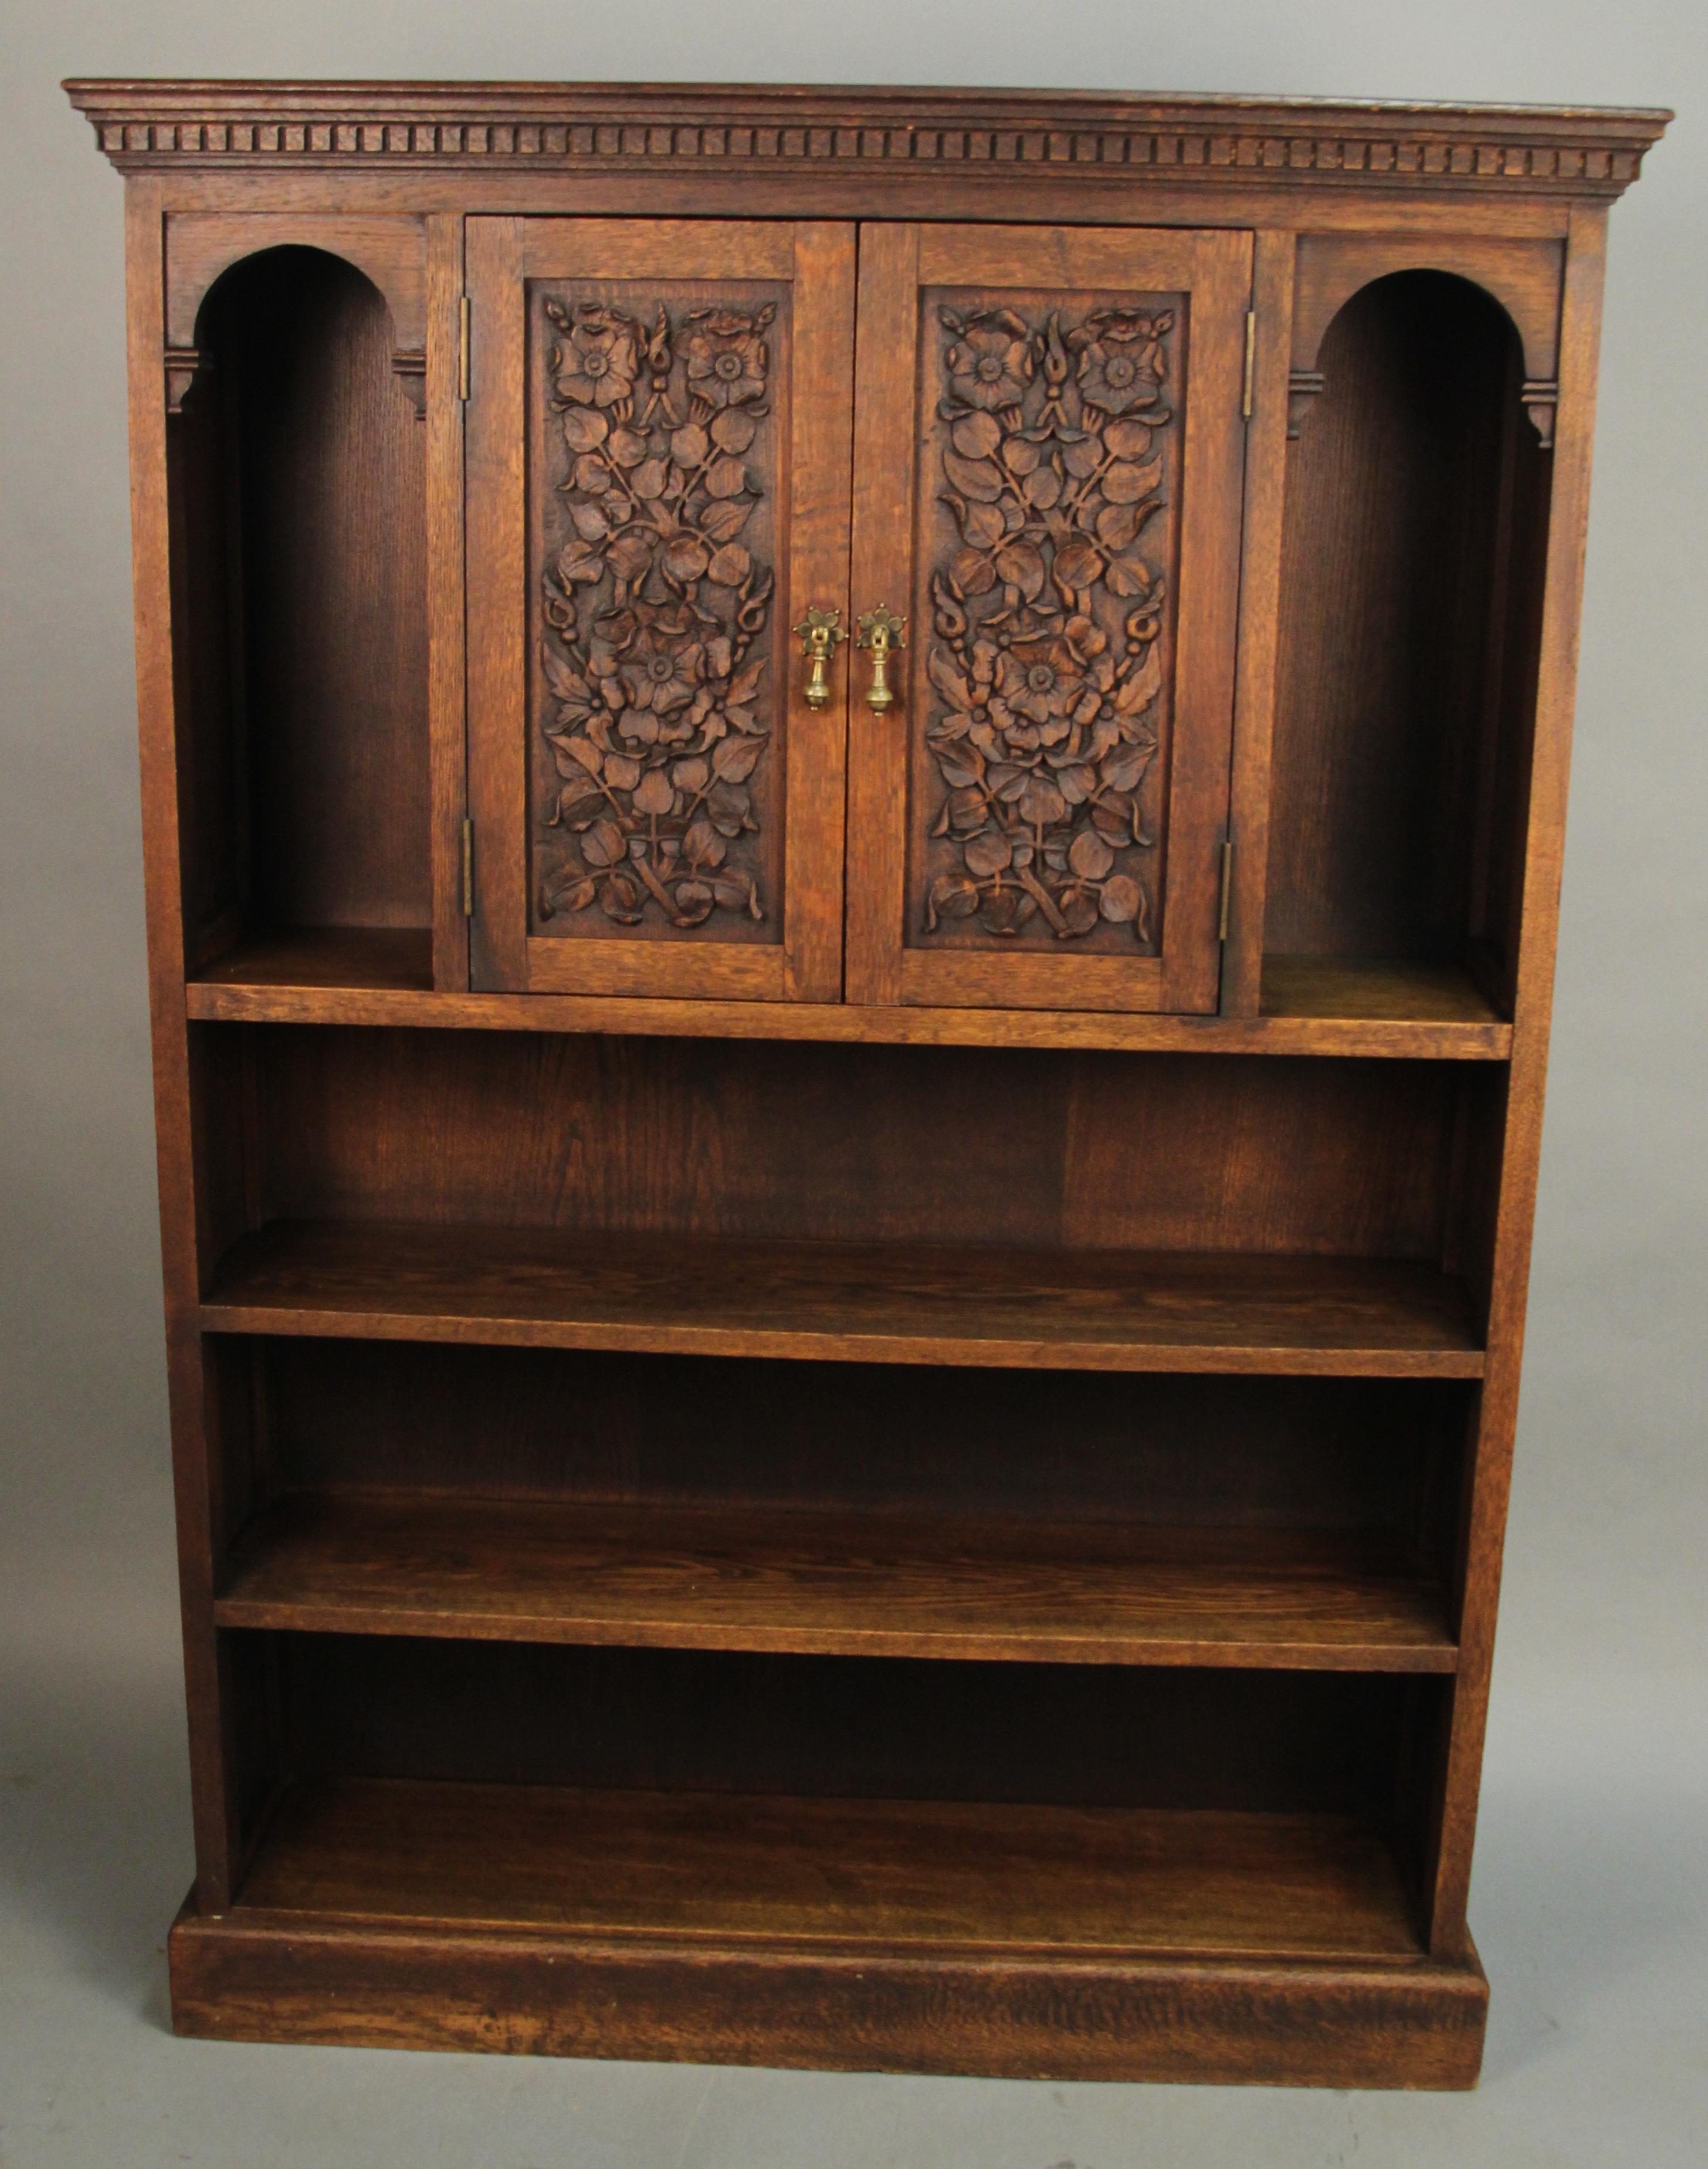 1920s bookcase with beautiful floral motif carved panels.